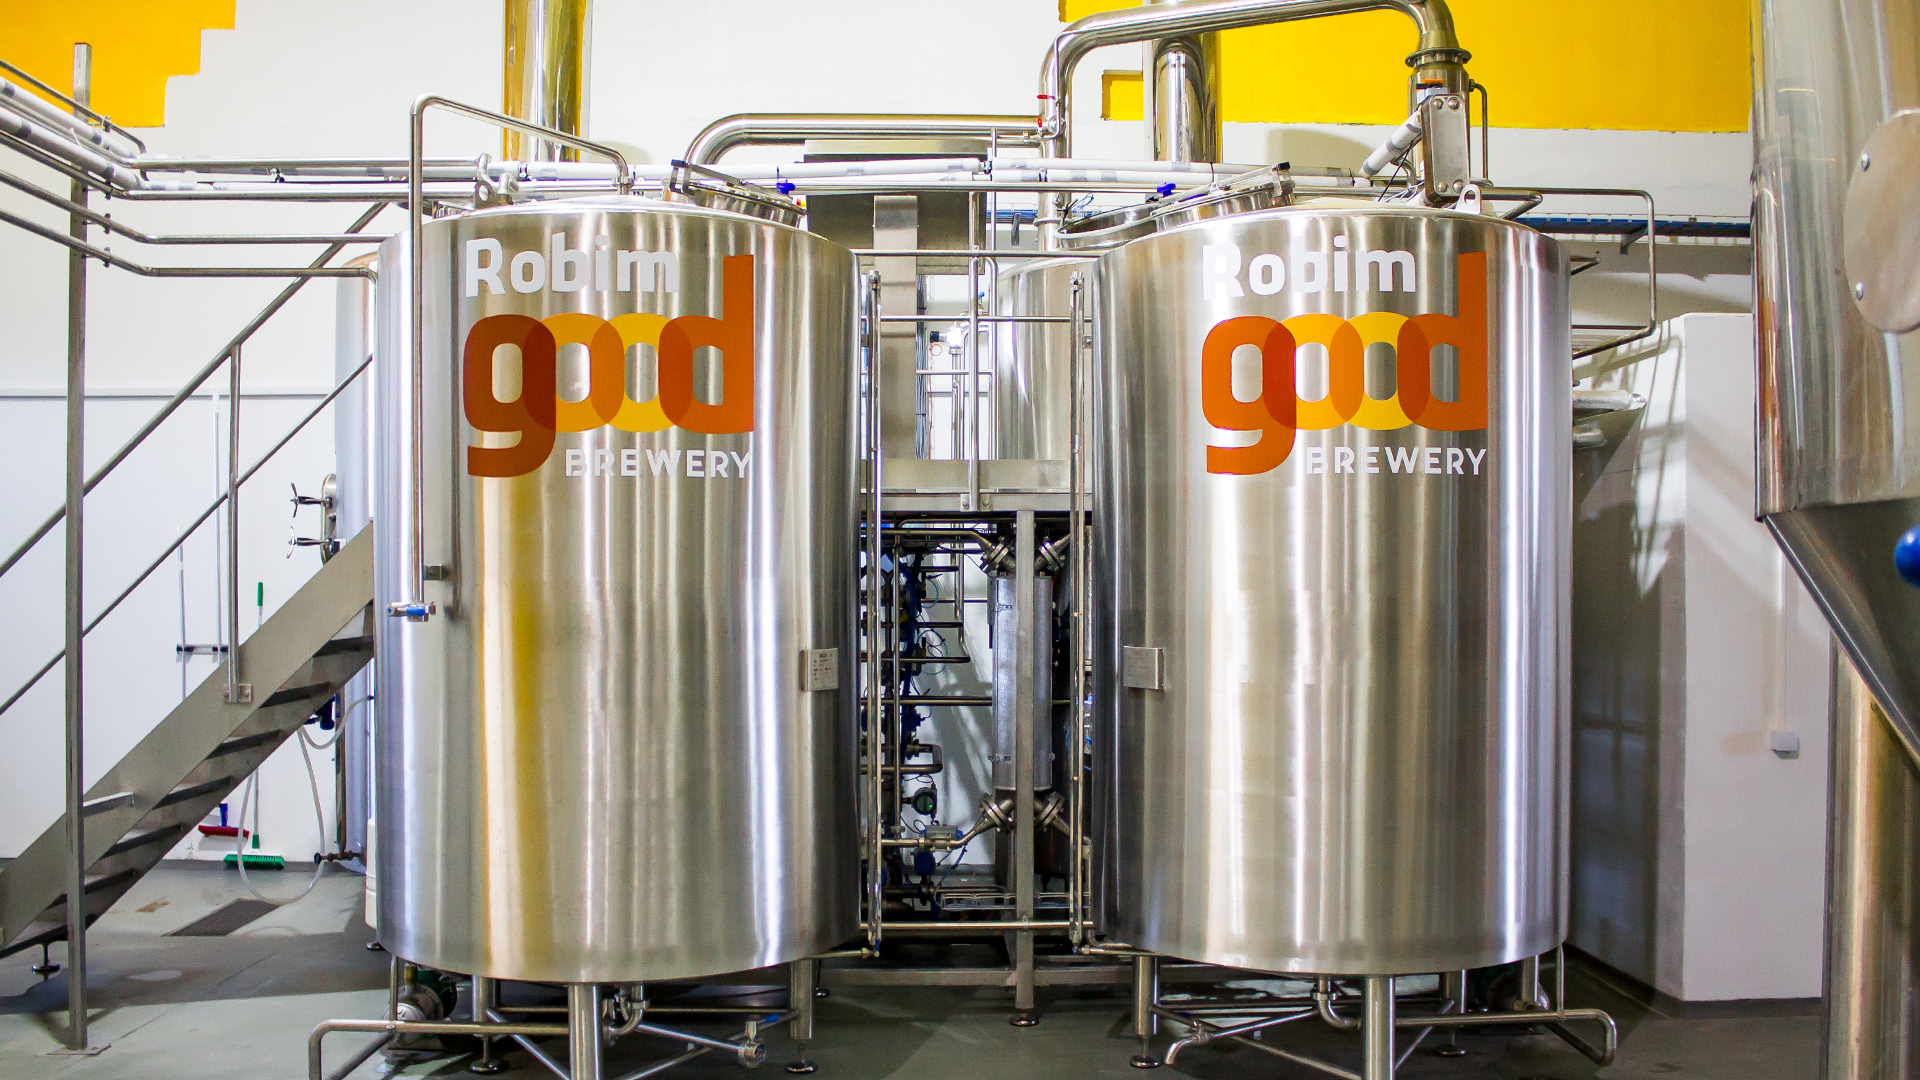 Brand for Local brewery Robim Good